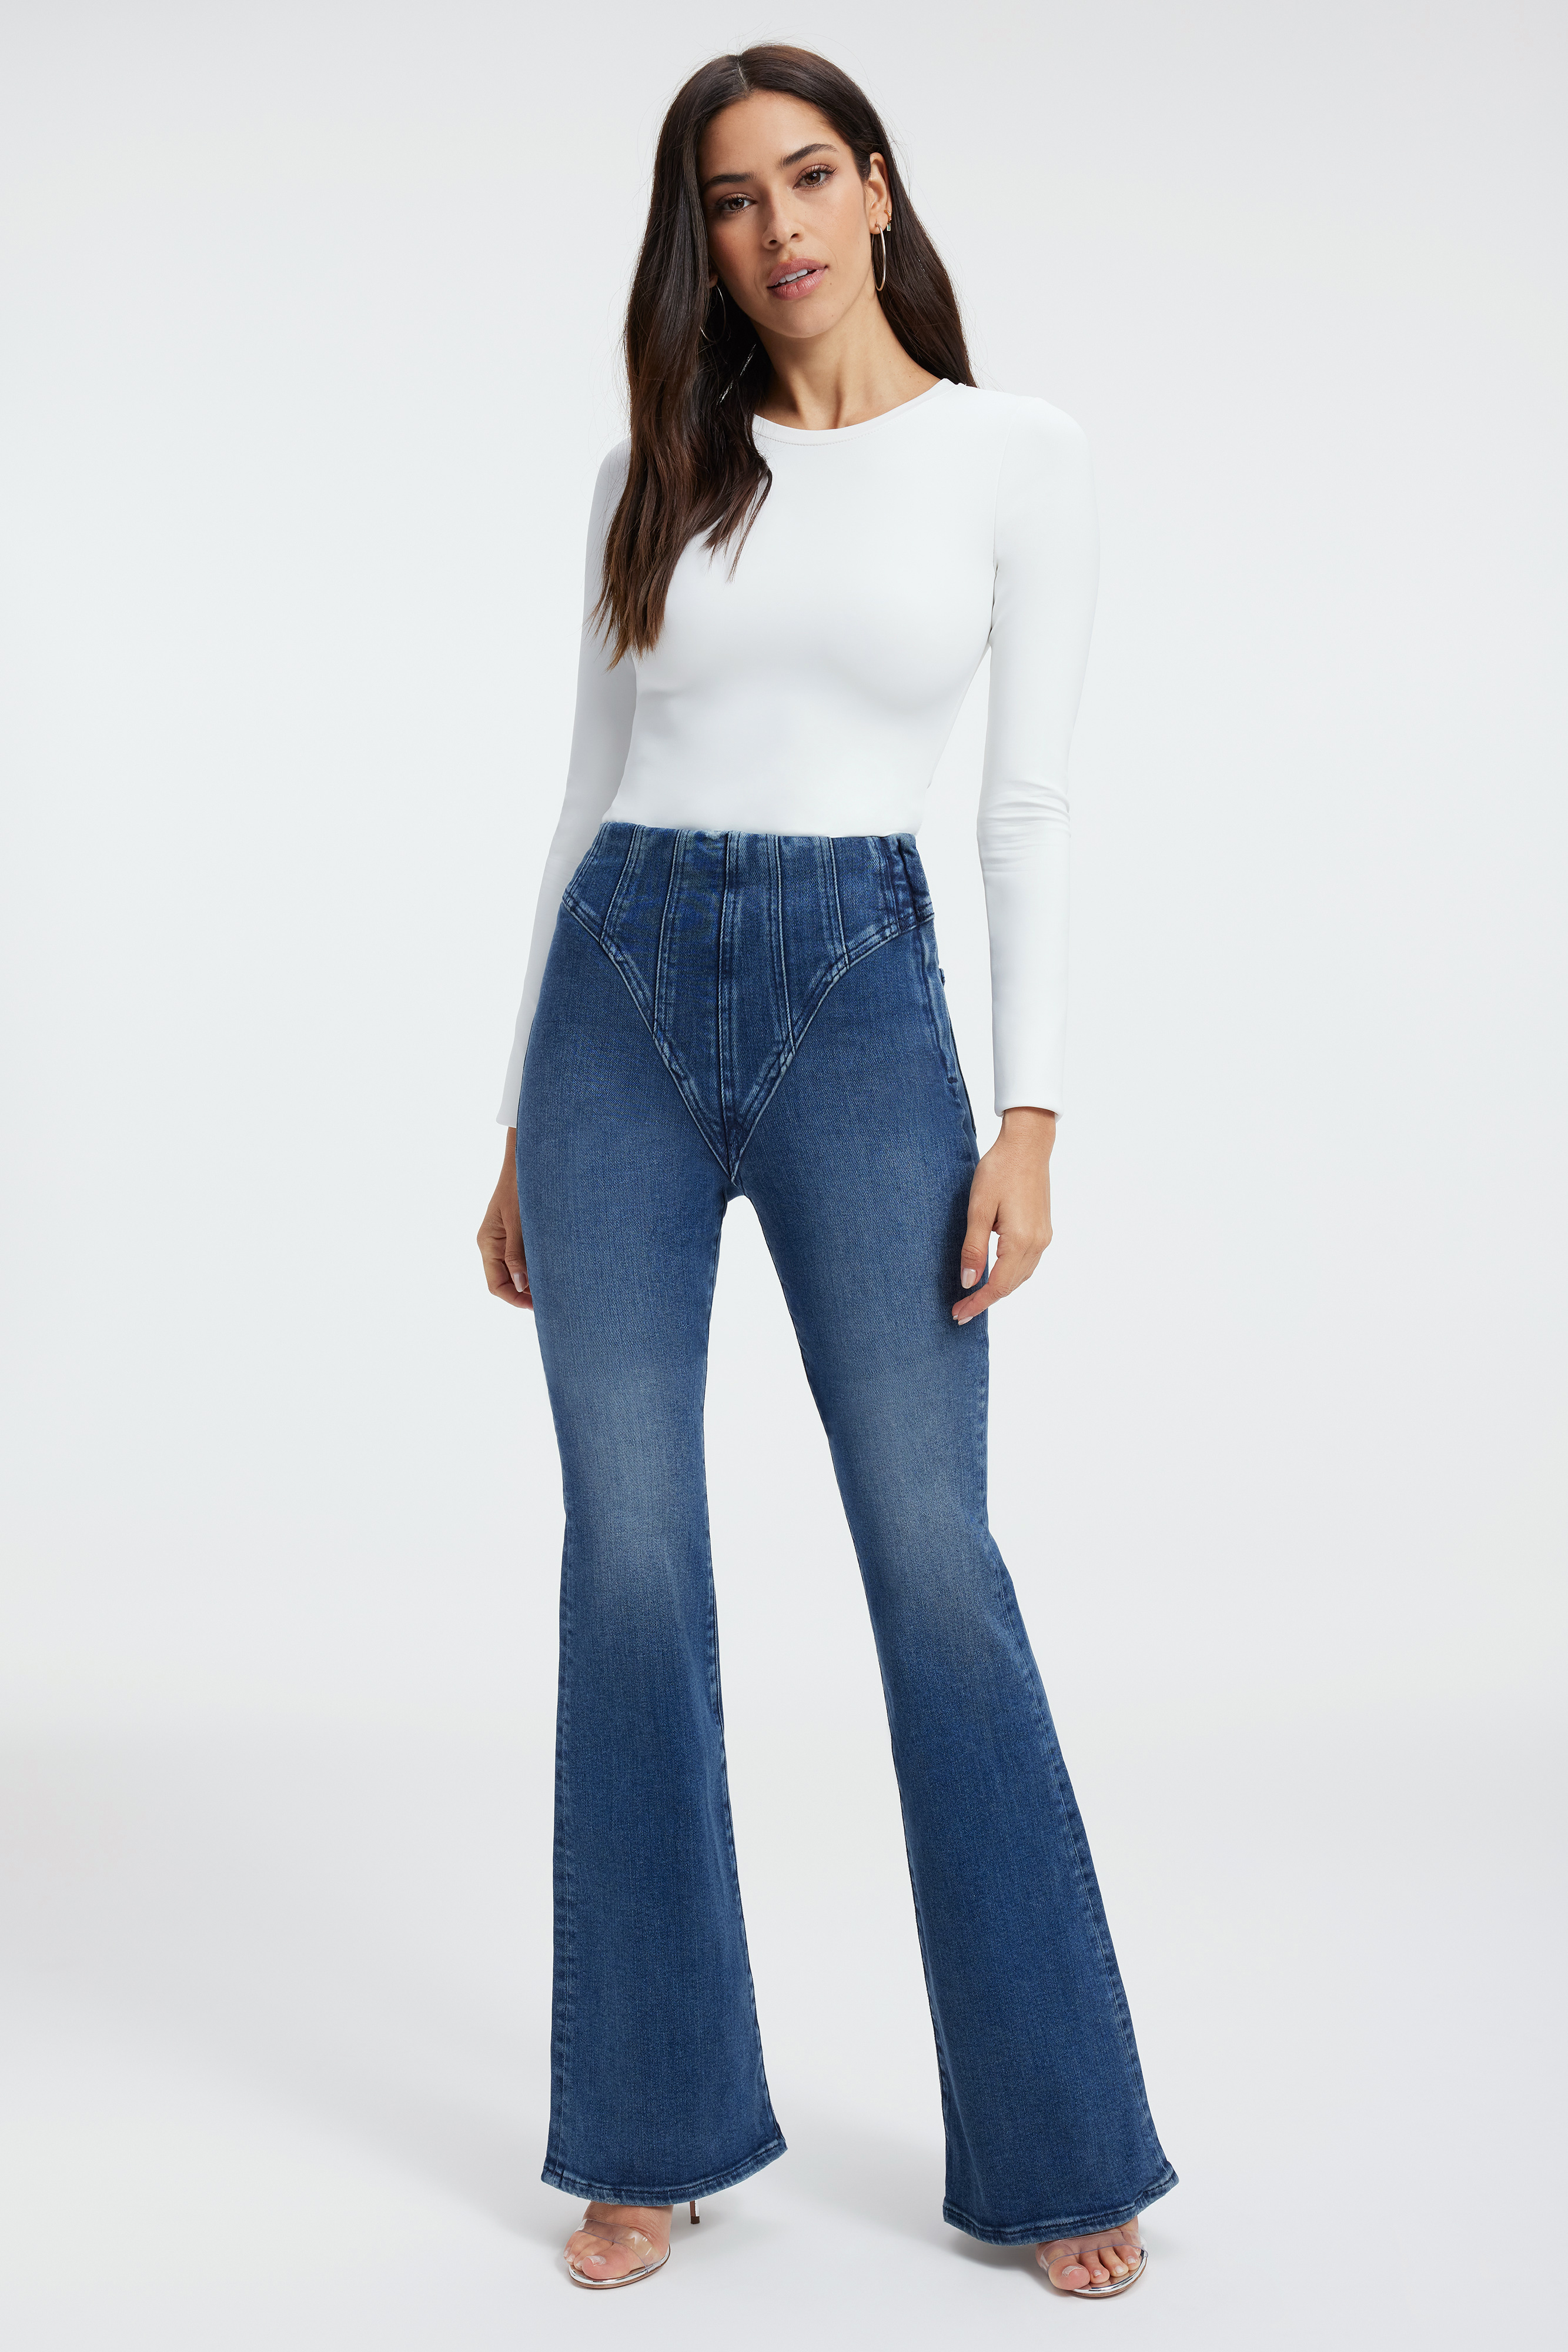 Styled with GOOD LEGS FLARE MEGA COMPRESSION JEANS | INDIGO443